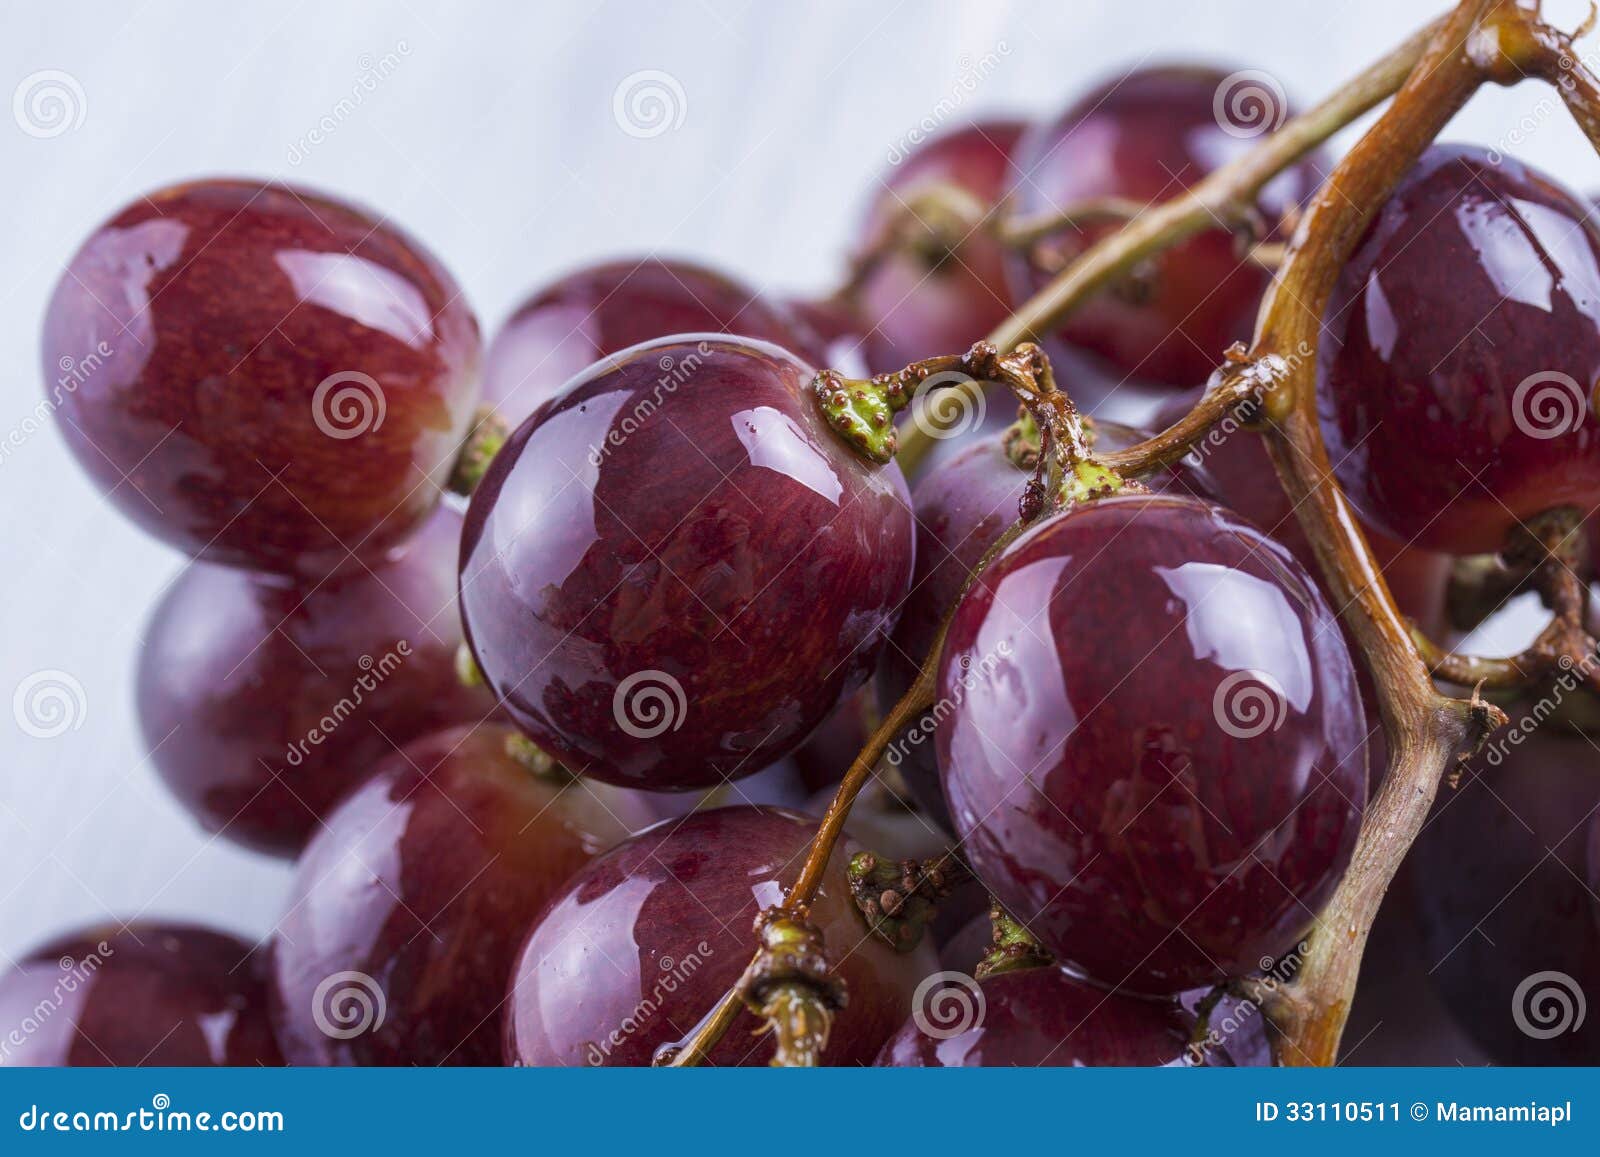 Close up photo of edible fruits - a red grapes on a solid bright blue wooden table